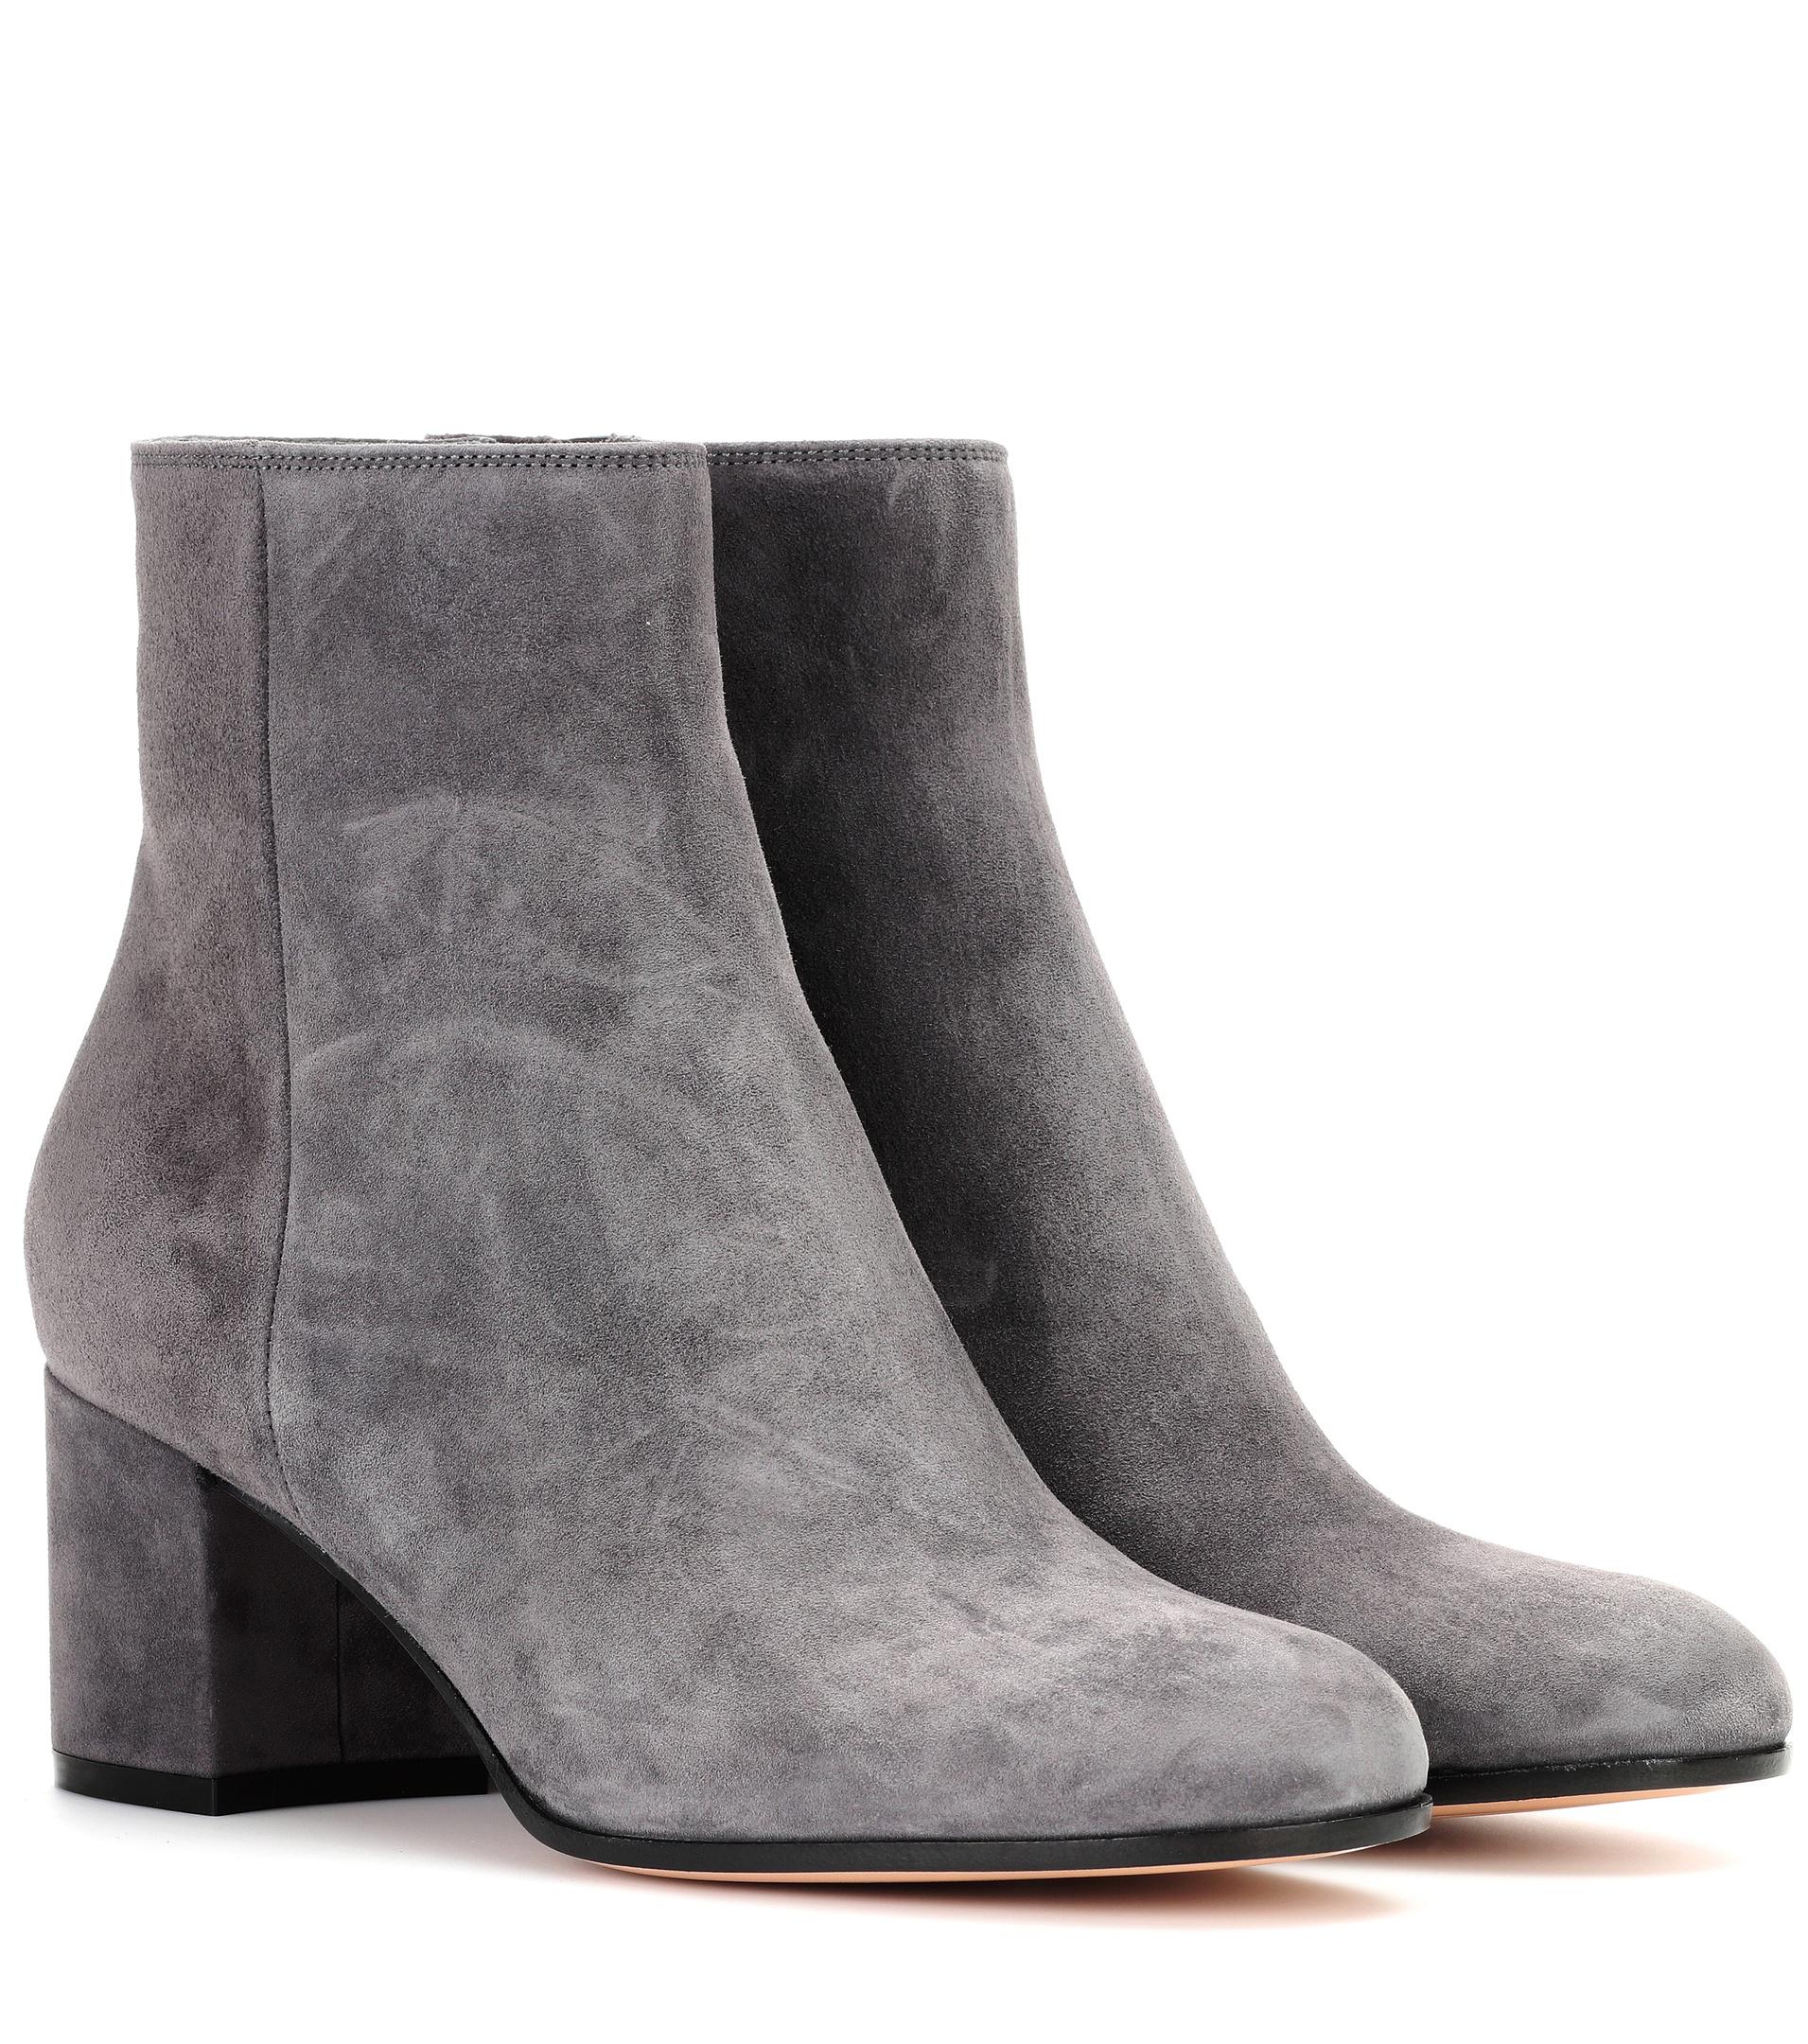 Gianvito Rossi Margaux Mid Suede Ankle Boots in Grey (Gray) - Lyst